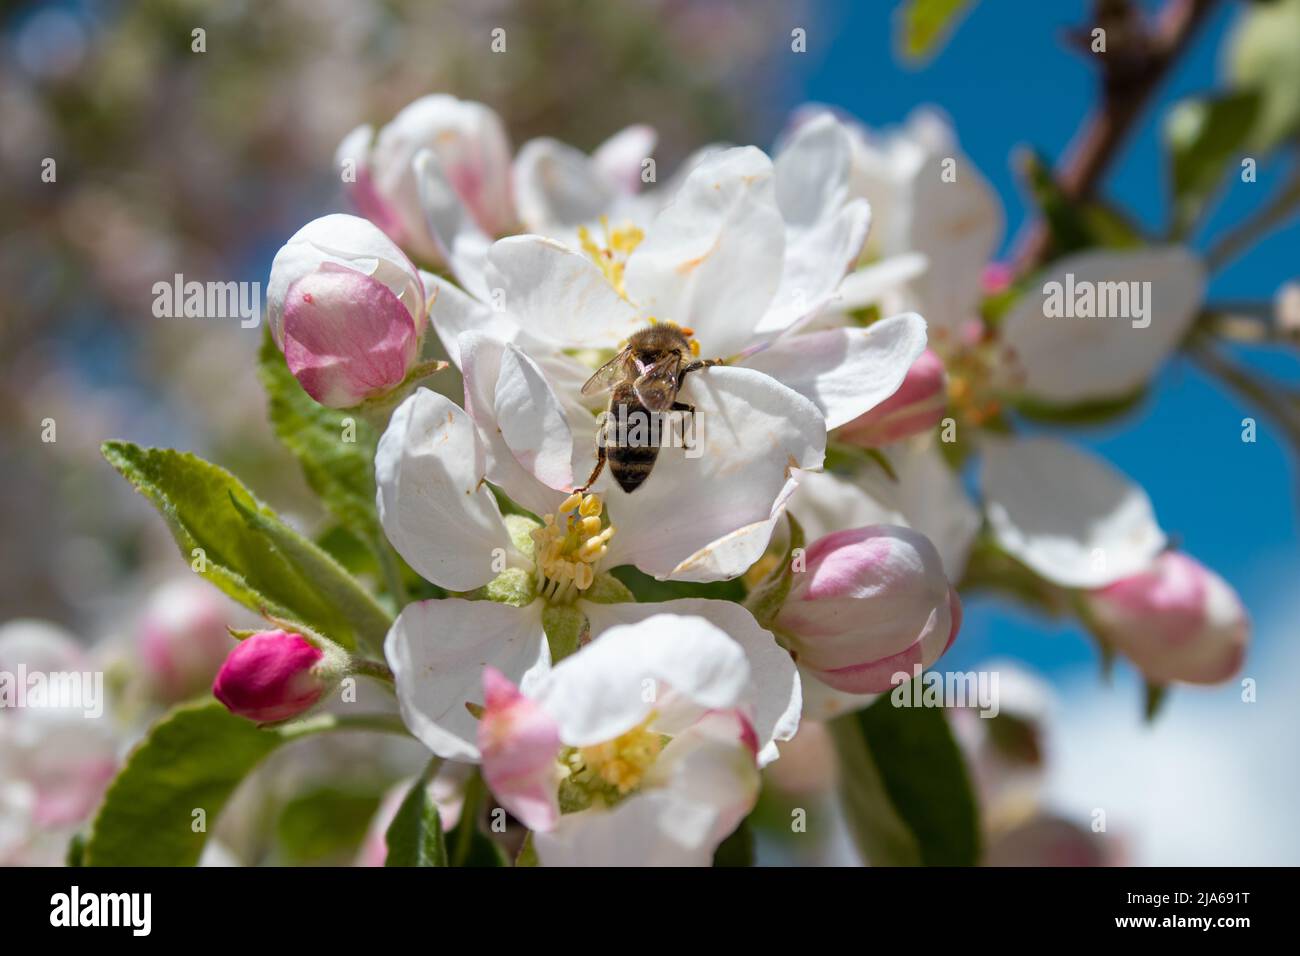 A bee perched on a flower collects pollen. Stock Photo